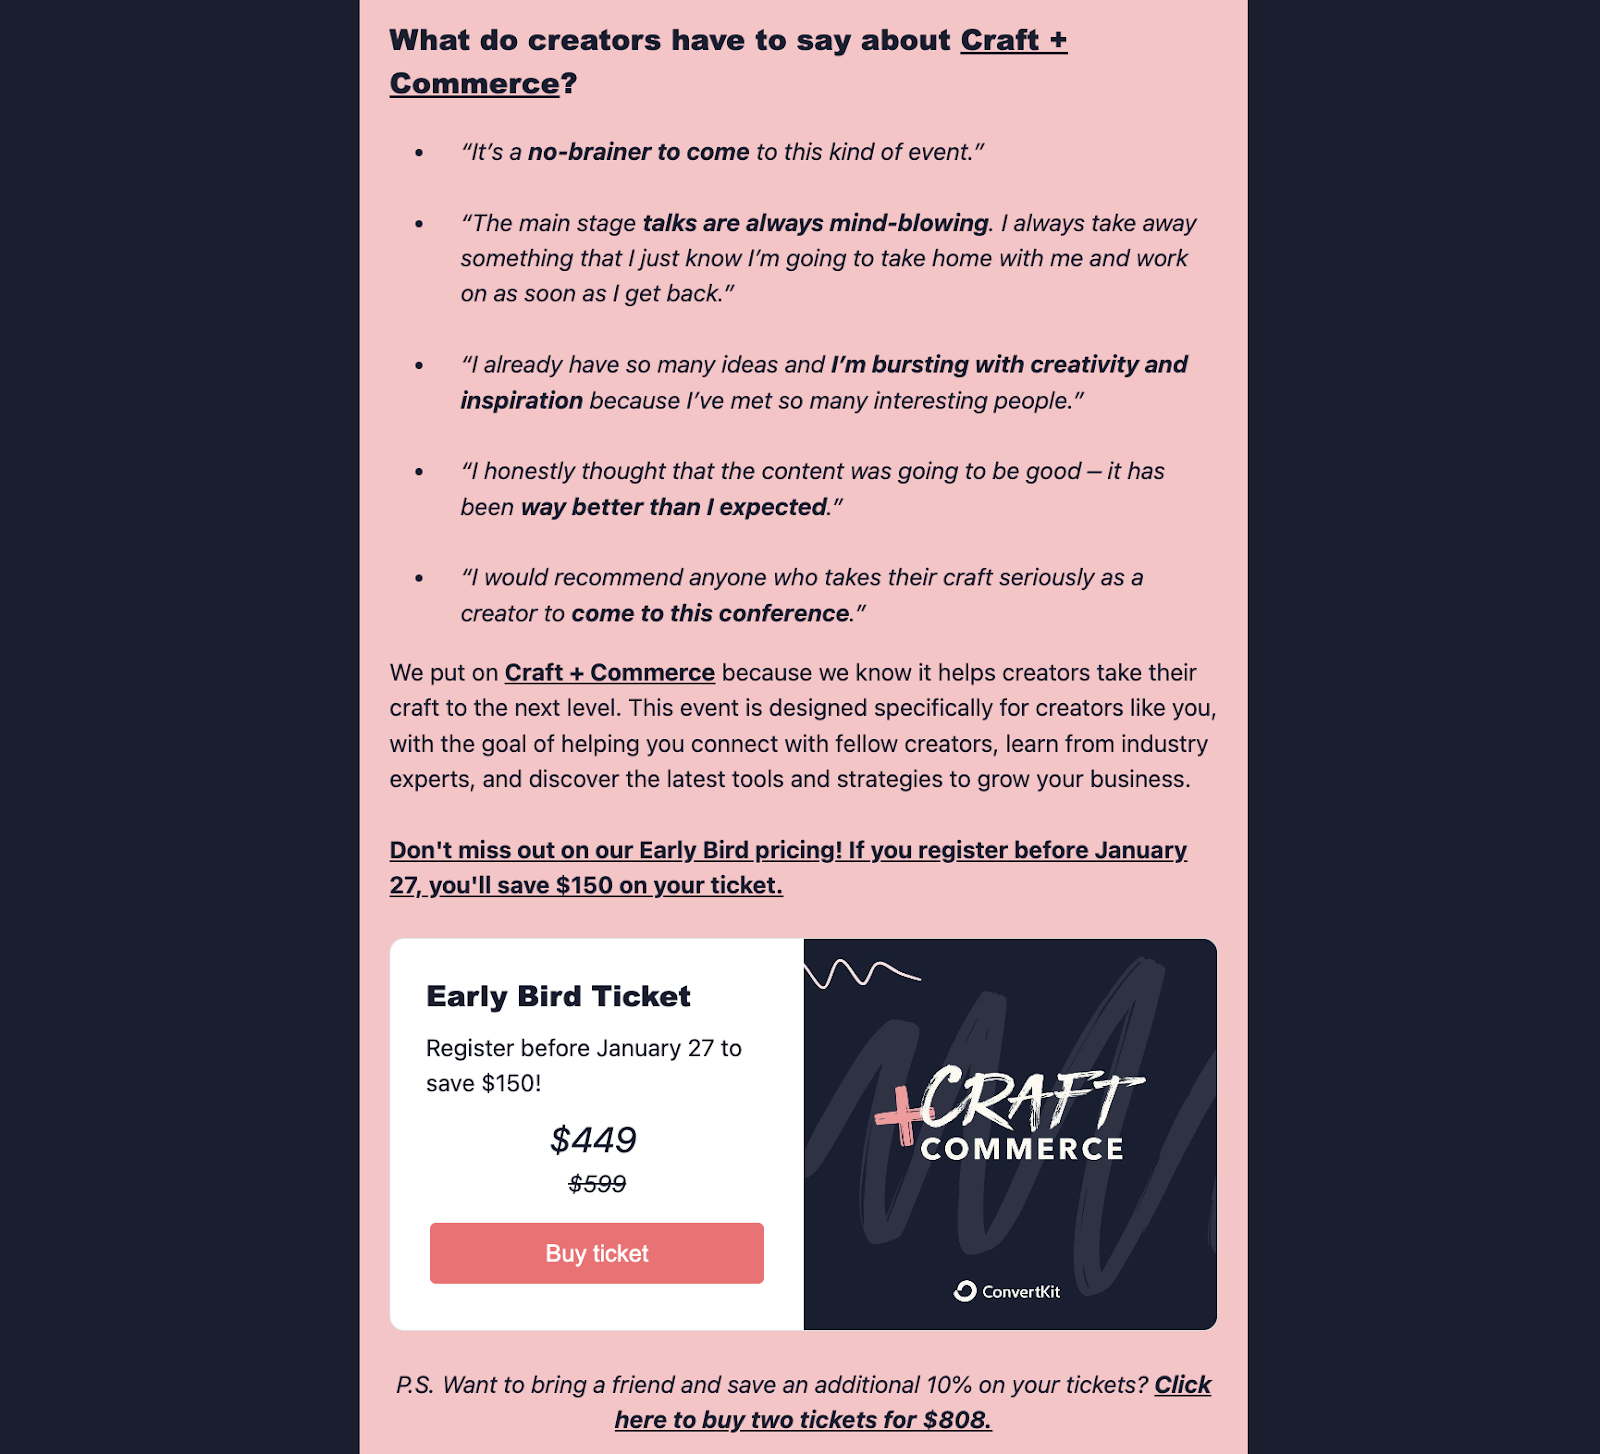 ConvertKit email invite to Craft + Commerce event.